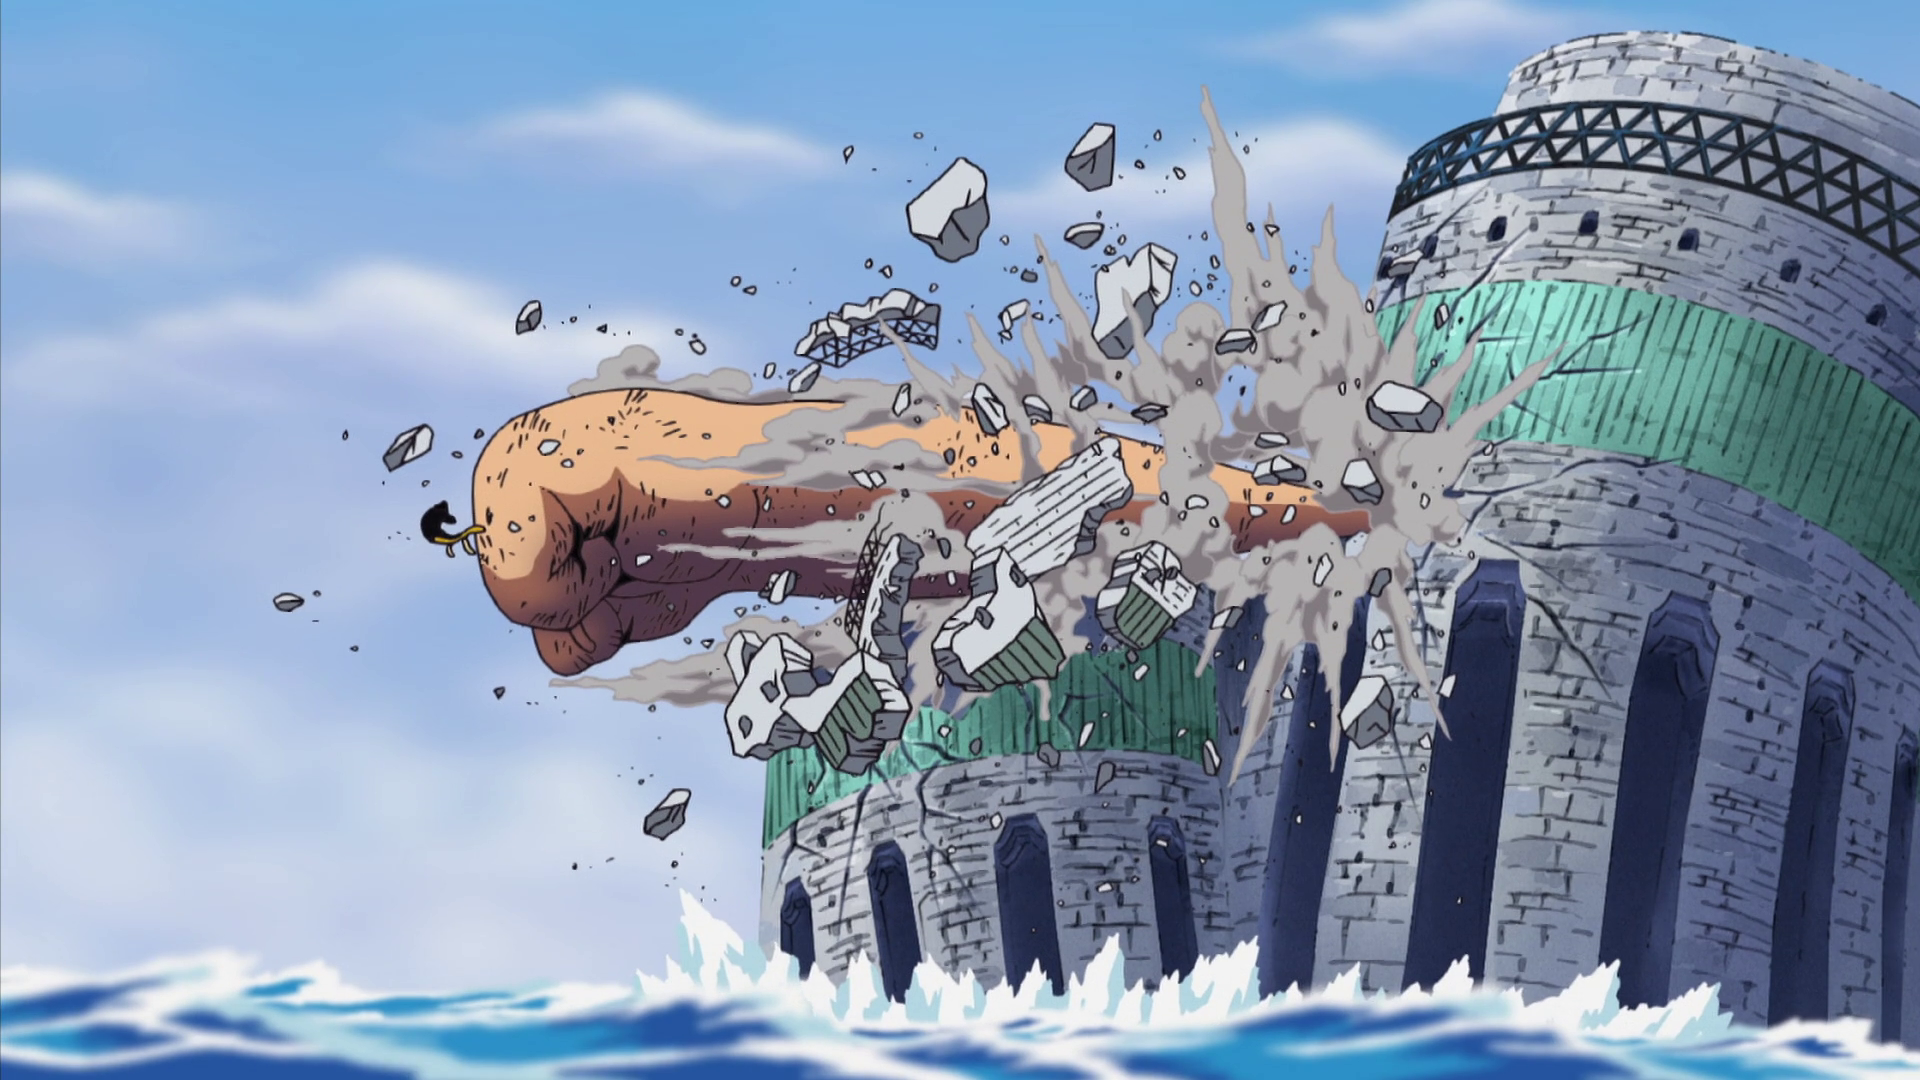 http://img2.wikia.nocookie.net/__cb20130115182541/onepiece/it/images/f/f7/Gear_Third_contro_Lucci.png